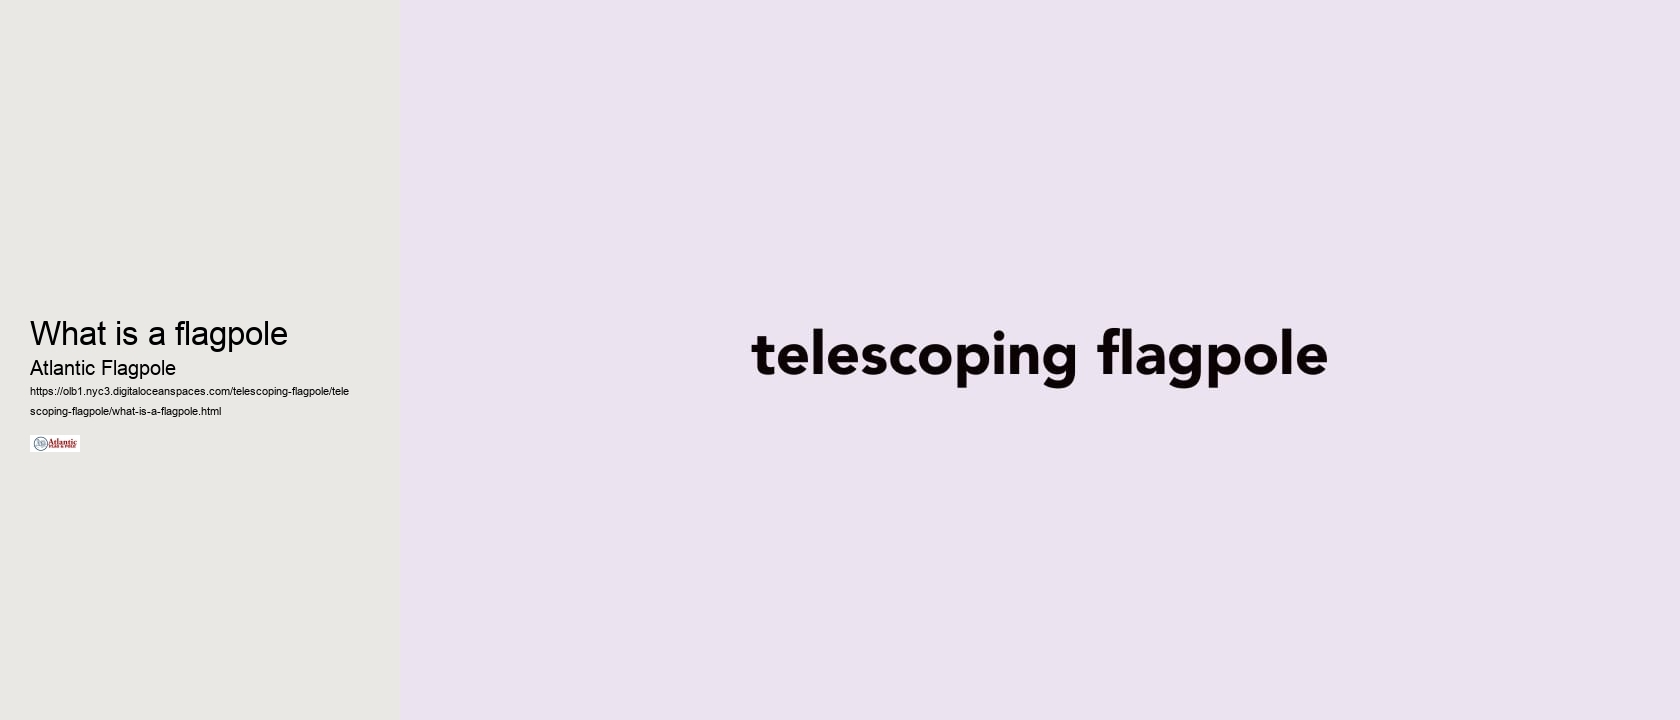 What is a flagpole